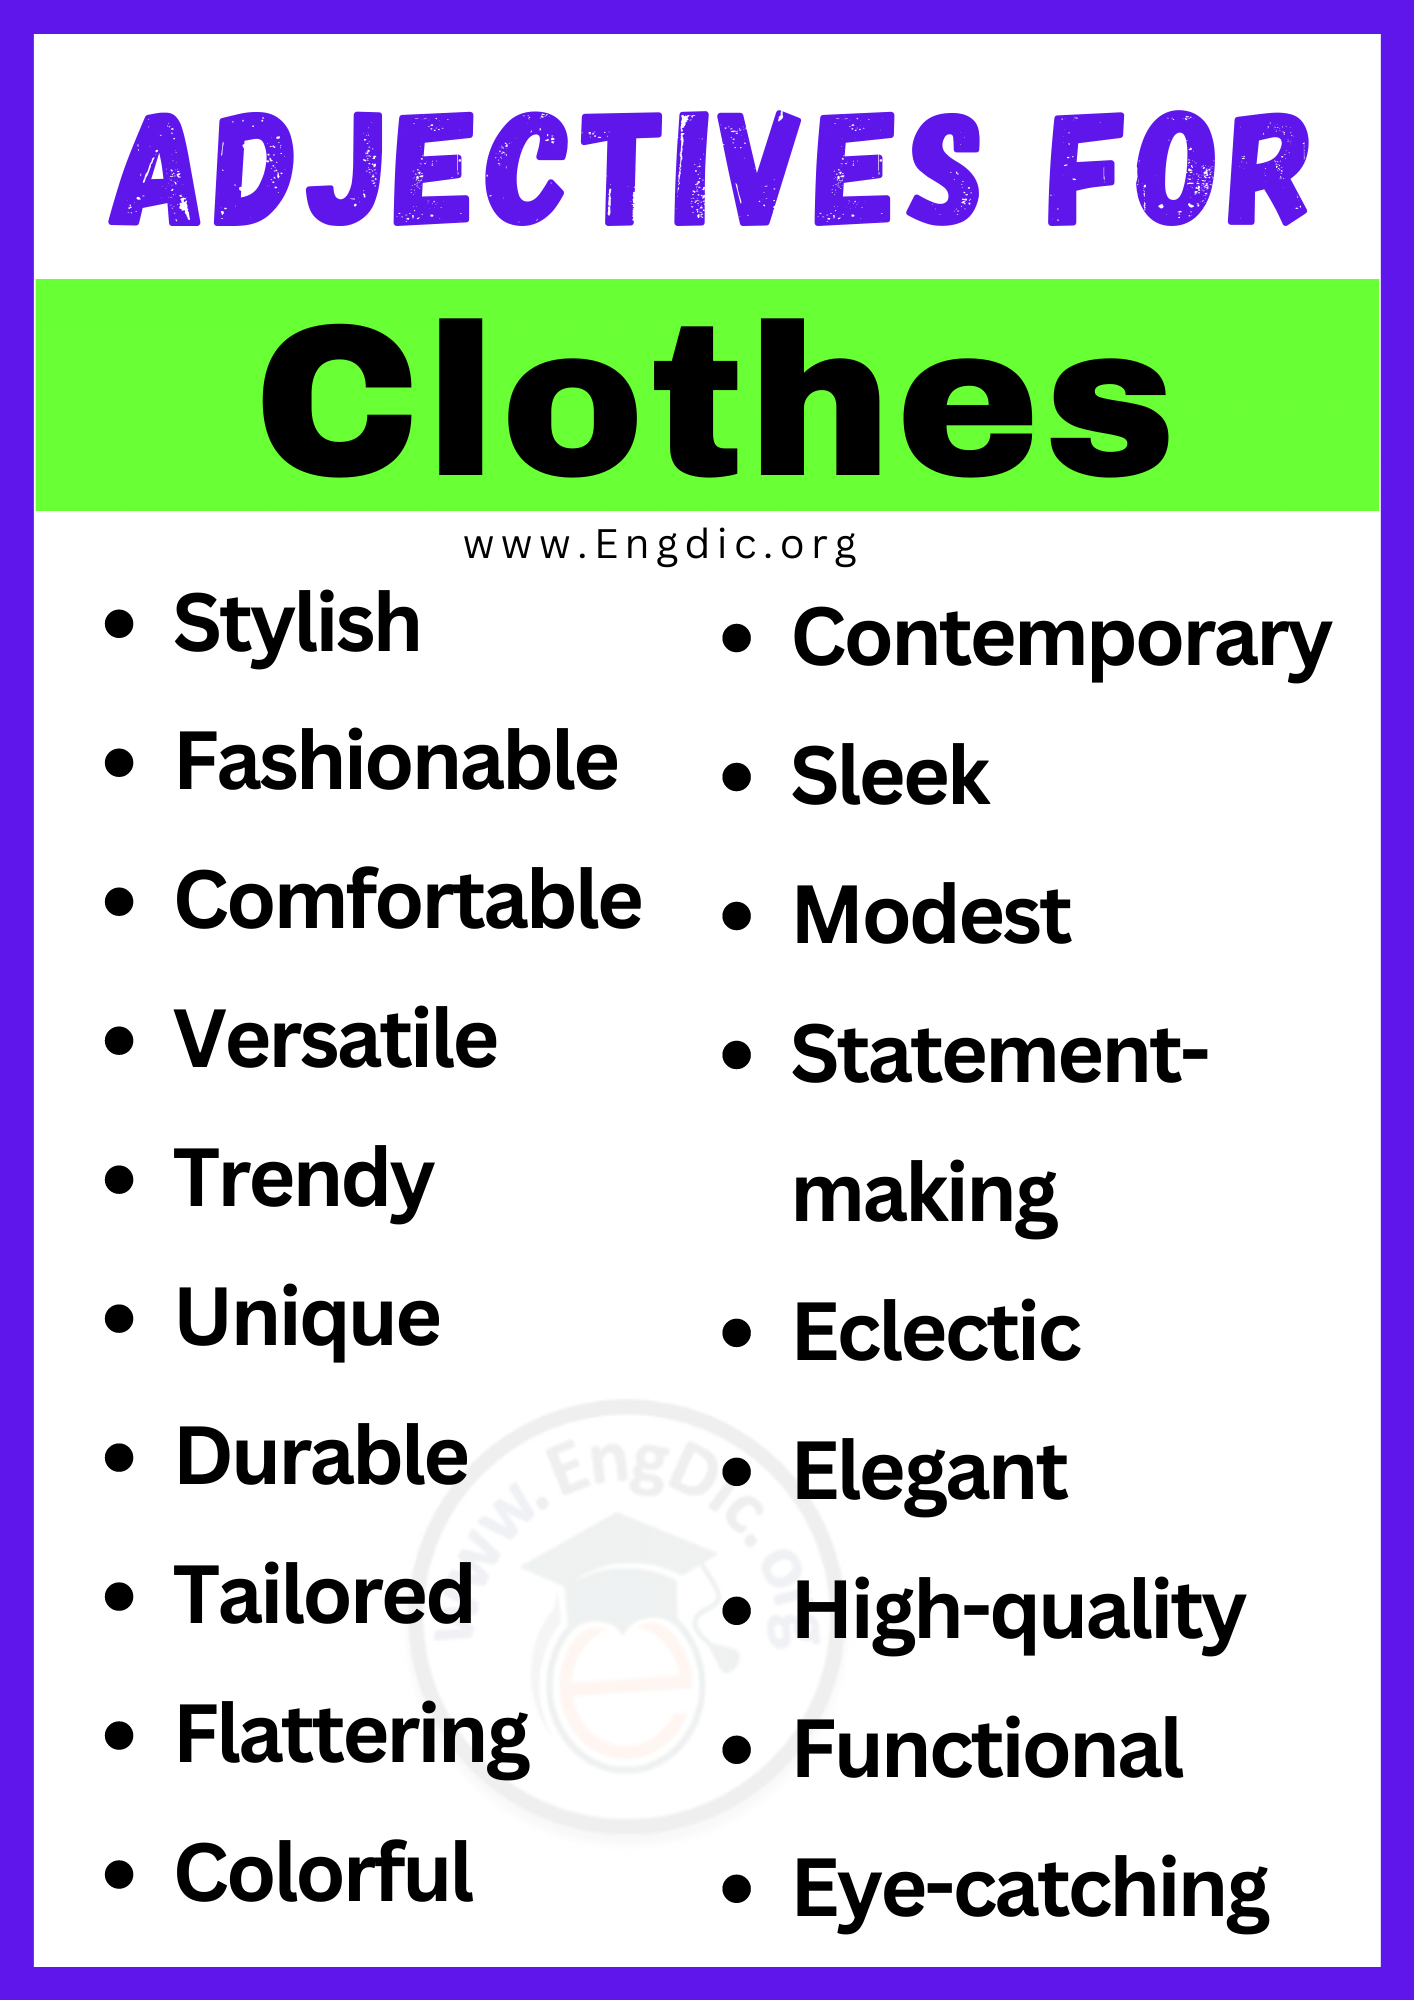 Adjectives for Clothes